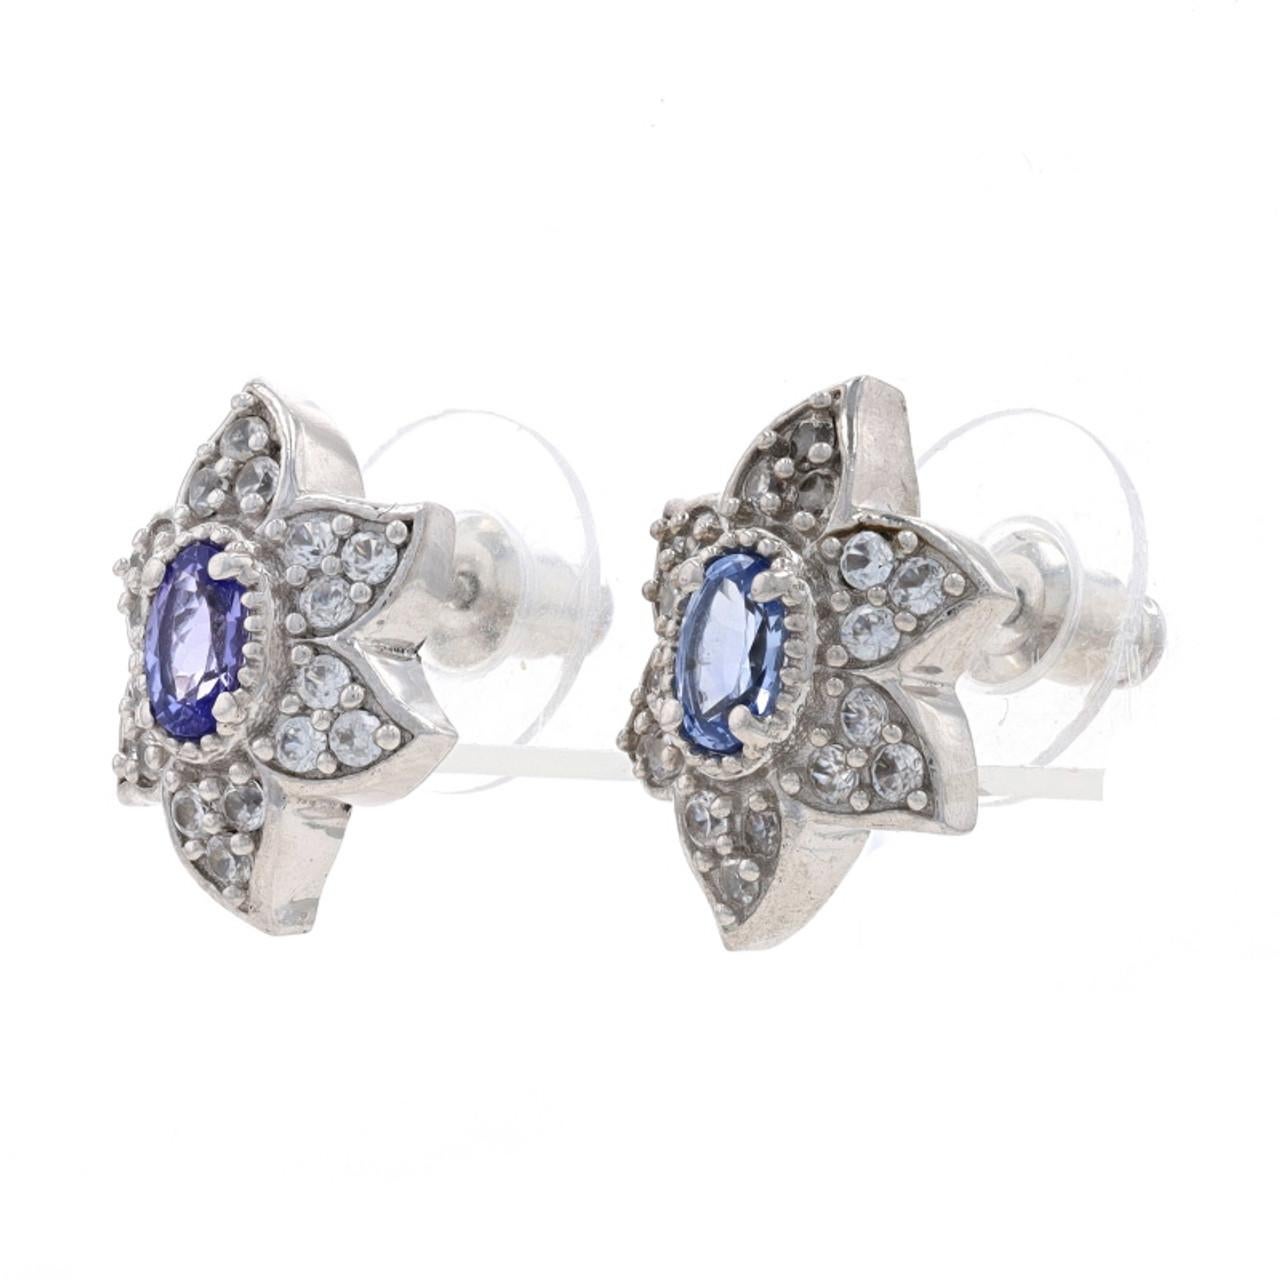 Sterling Silver Tanzanite & White Topaz Large Stud Earrings 925 Flowers Pierced

Stone Information:
Natural Tanzanites
Treatment: Routinely Enhanced
Color: Purple

Natural White Topaz

Additional information:
Material: Metal Sterling Silver
Style: